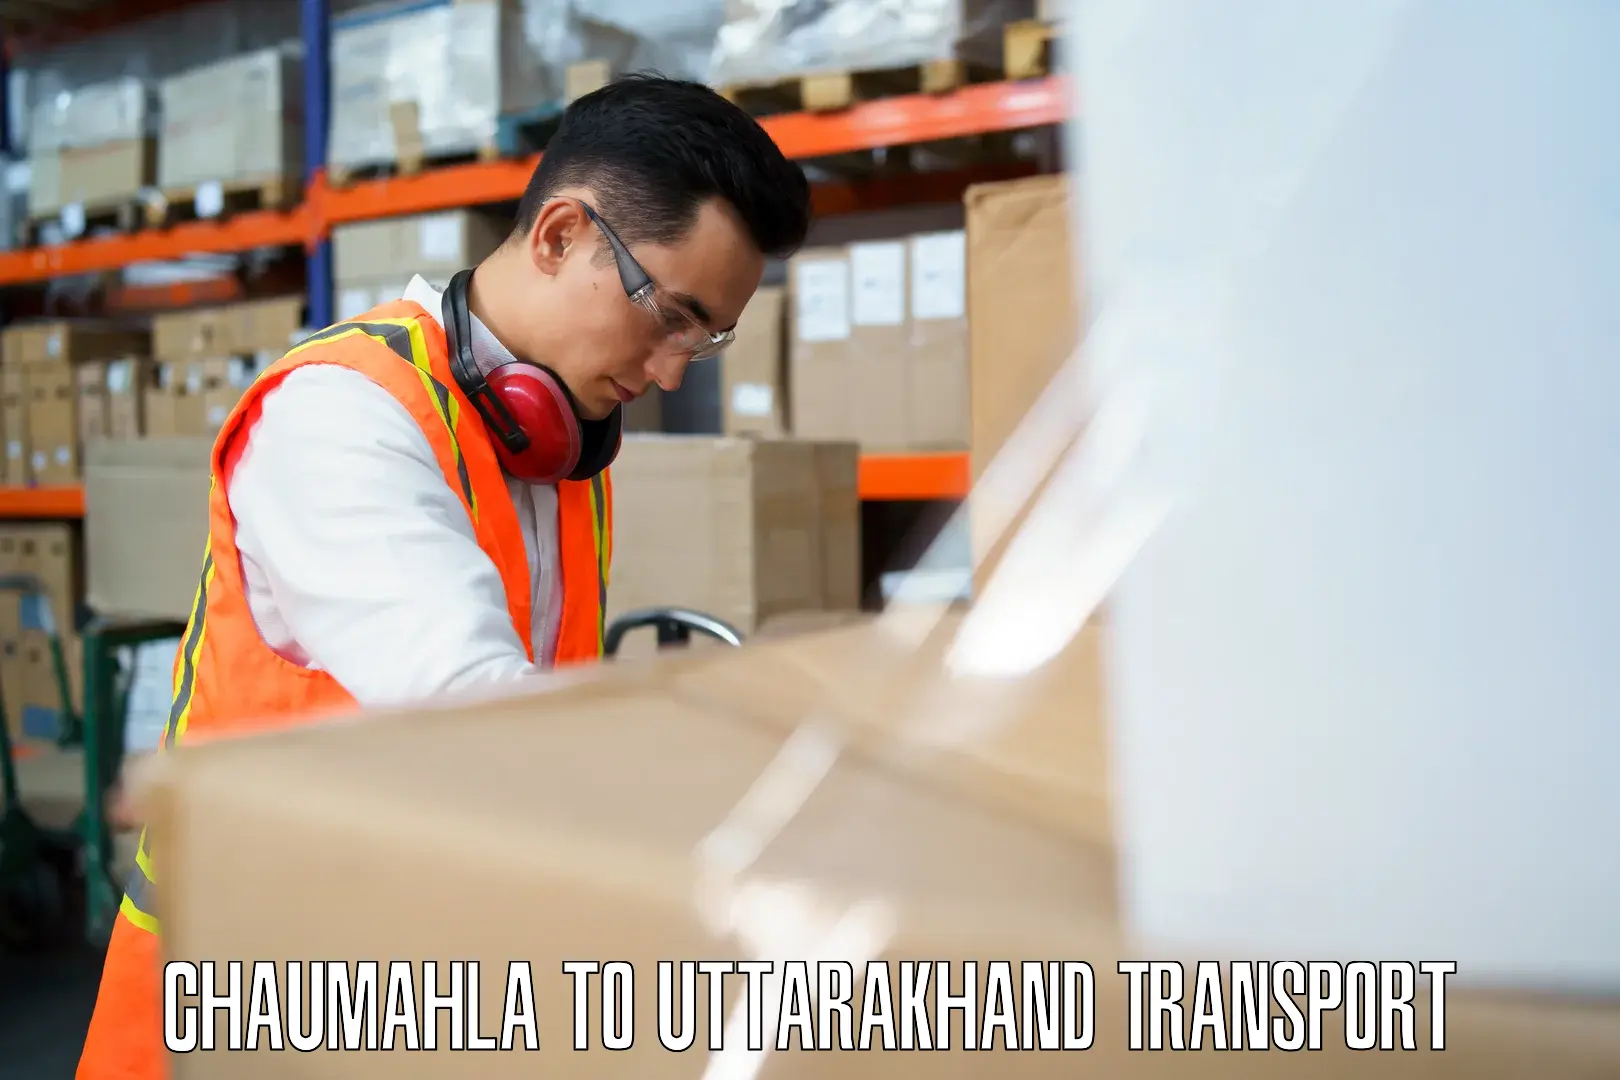 Road transport online services Chaumahla to IIT Roorkee